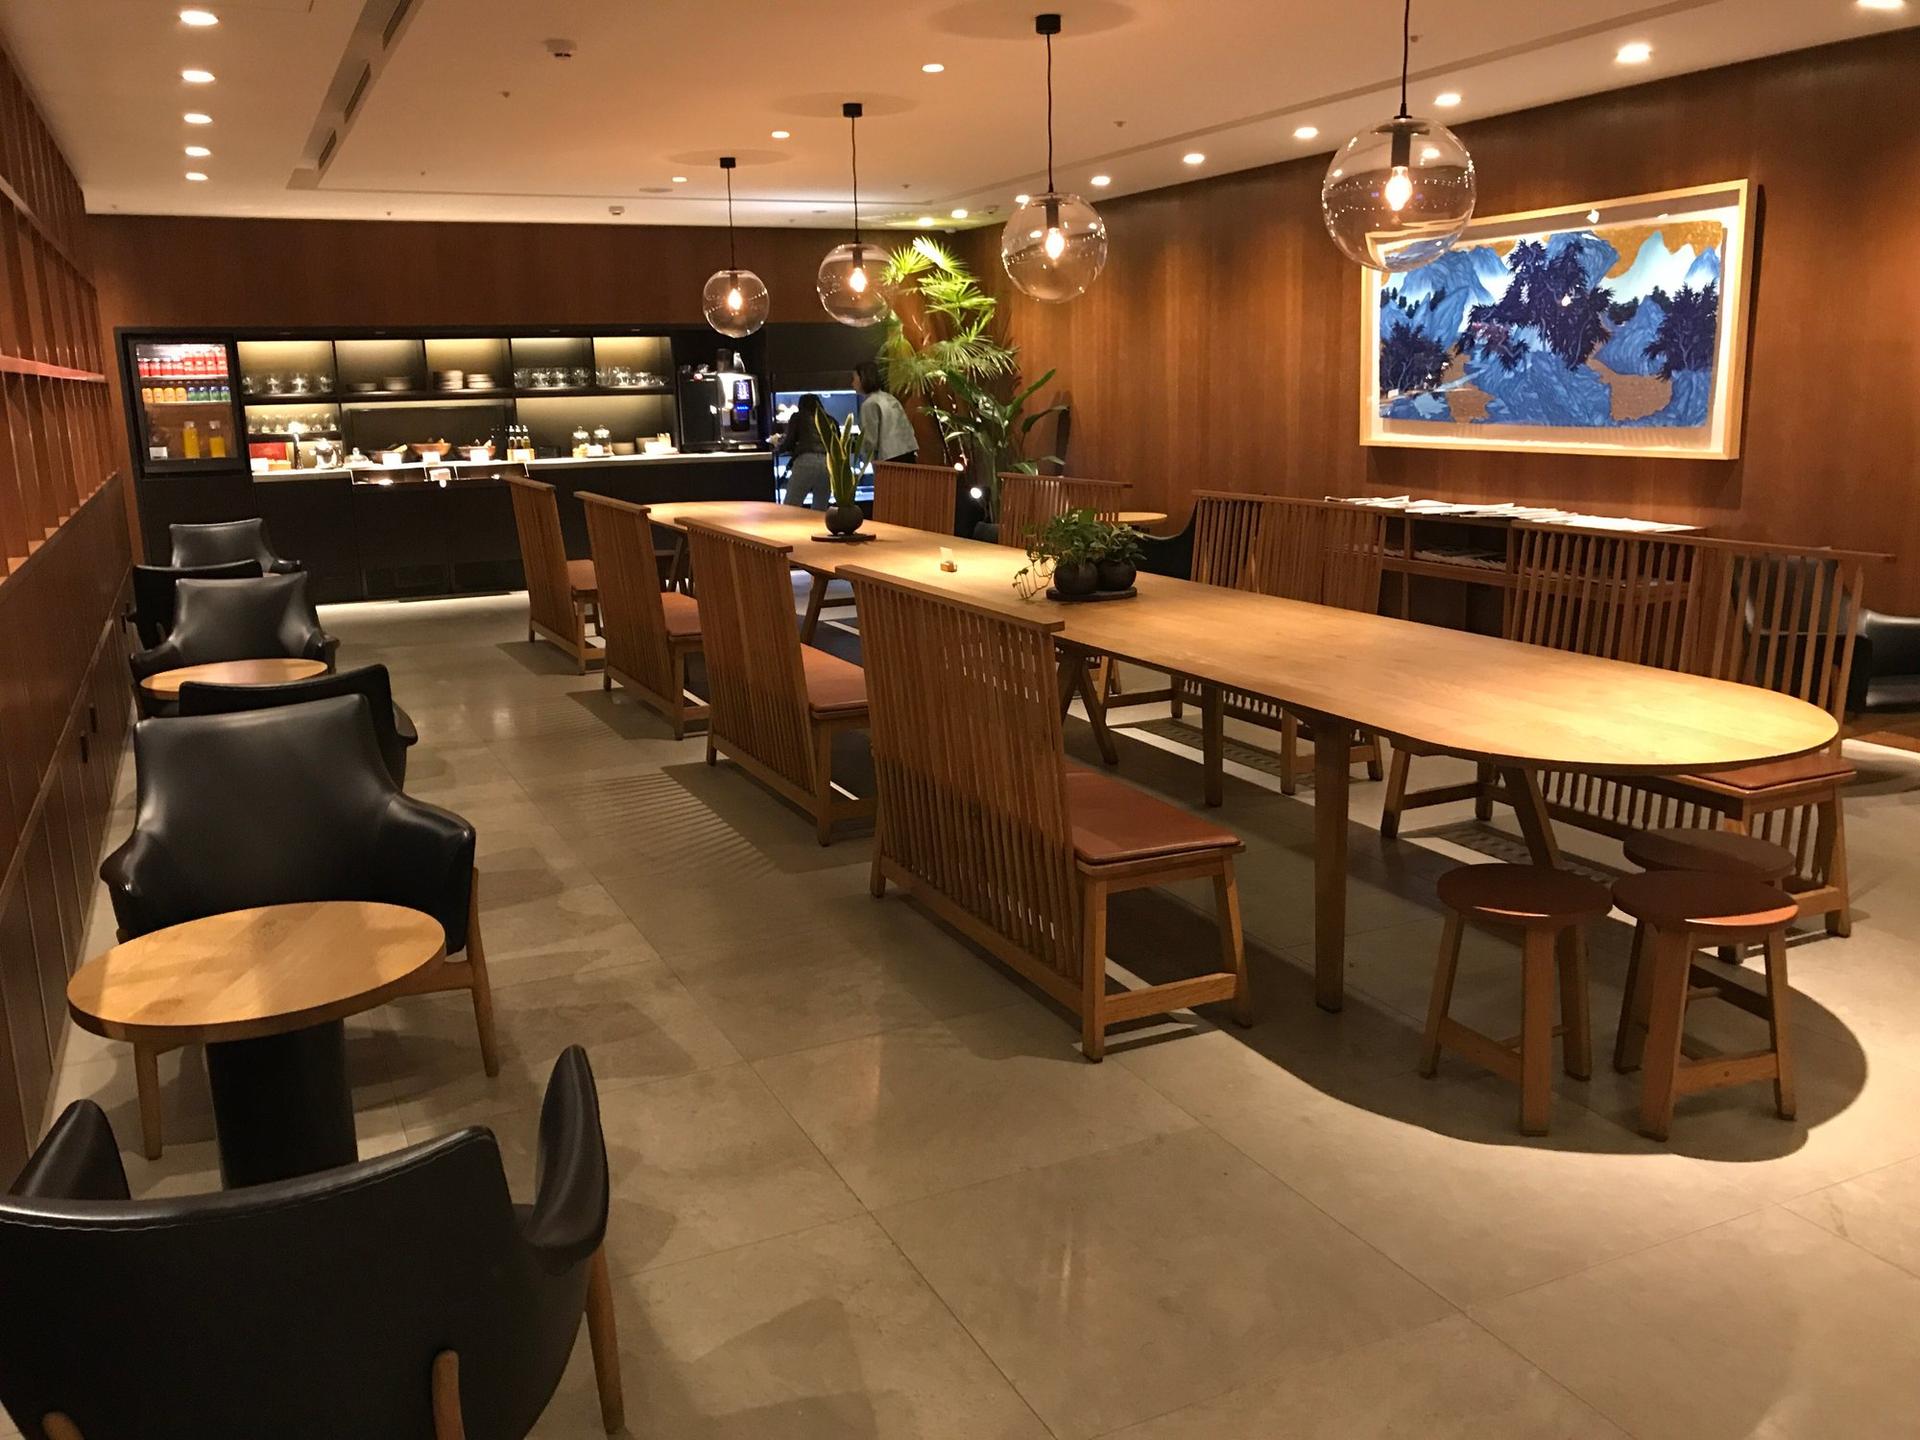 Cathay Pacific Lounge image 20 of 37